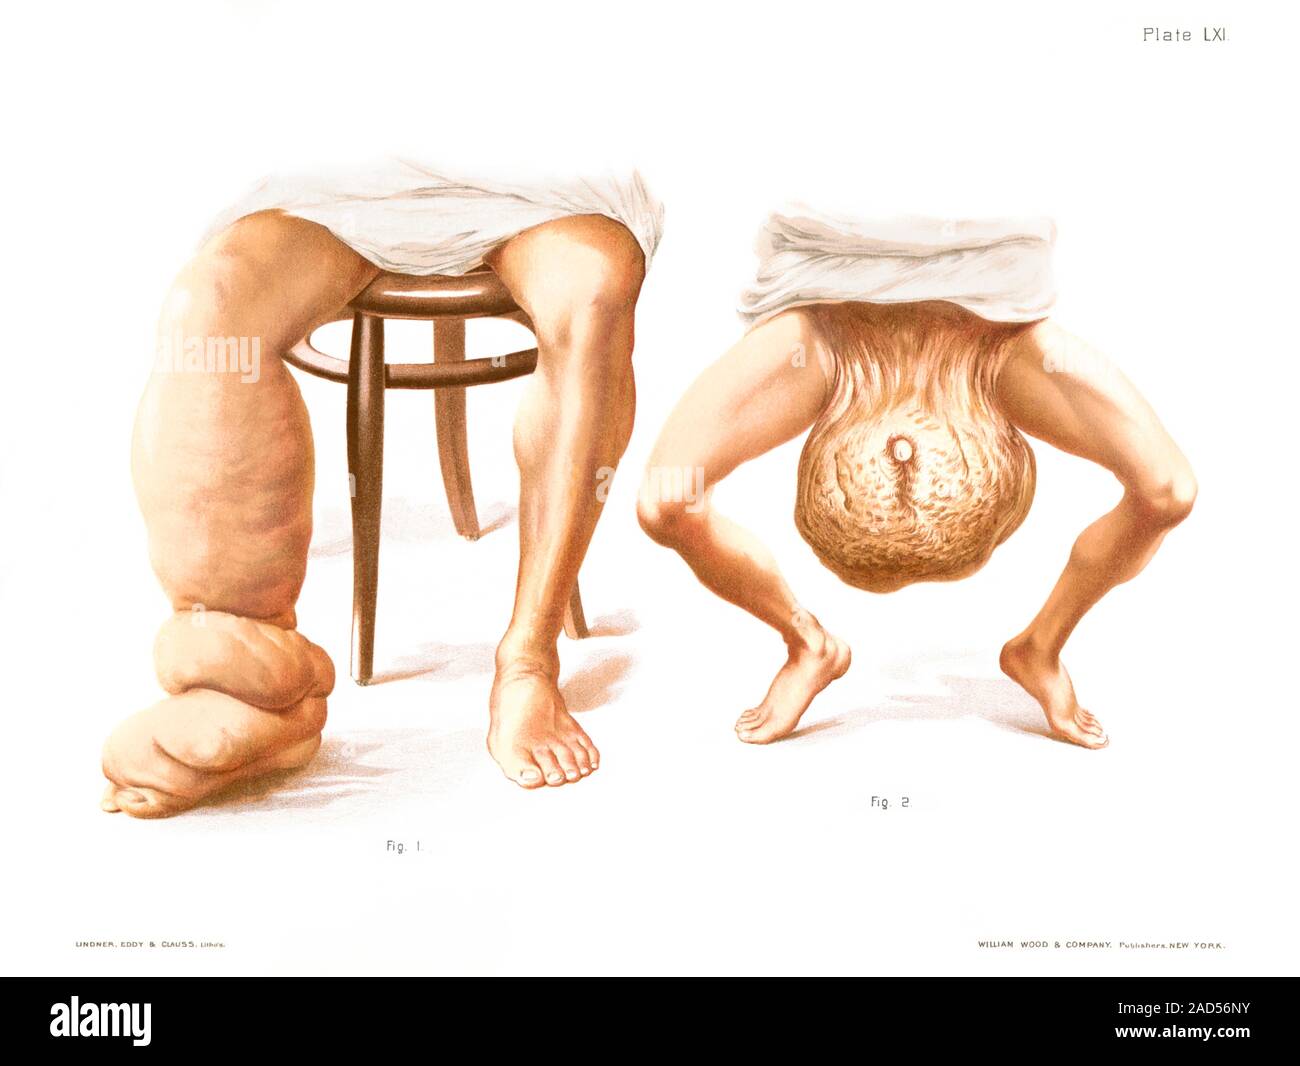 Elephantiasis. Historical medical illustration of severe elephantiasis (lymphatic filariasis) affecting the leg and the scrotum. This condition is cau Stock Photo